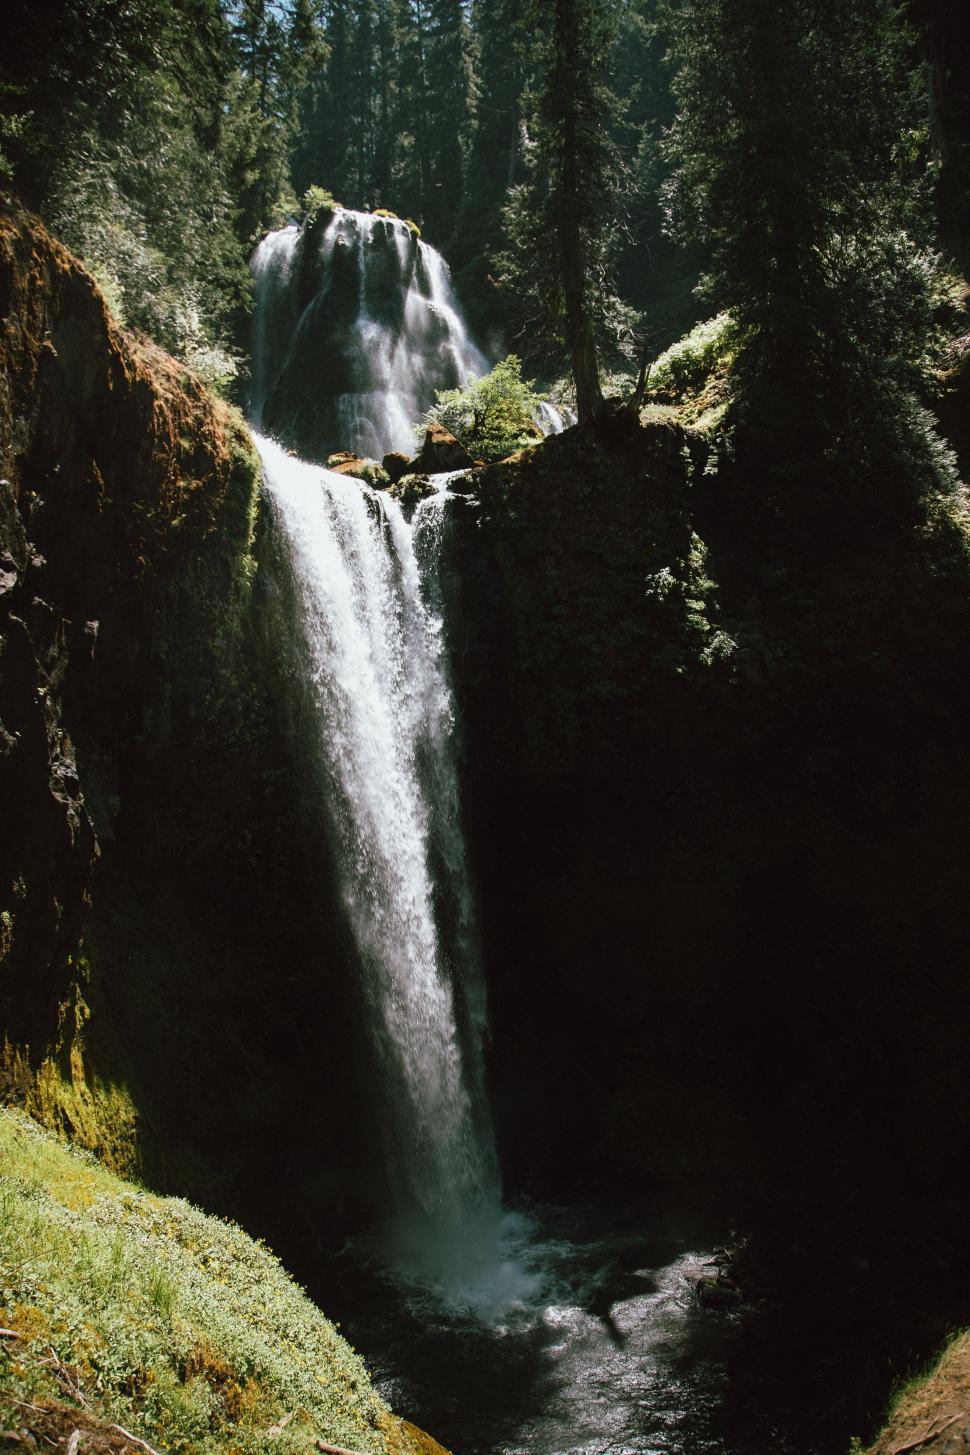 Free Image of Waterfall Cascading Through Forest 